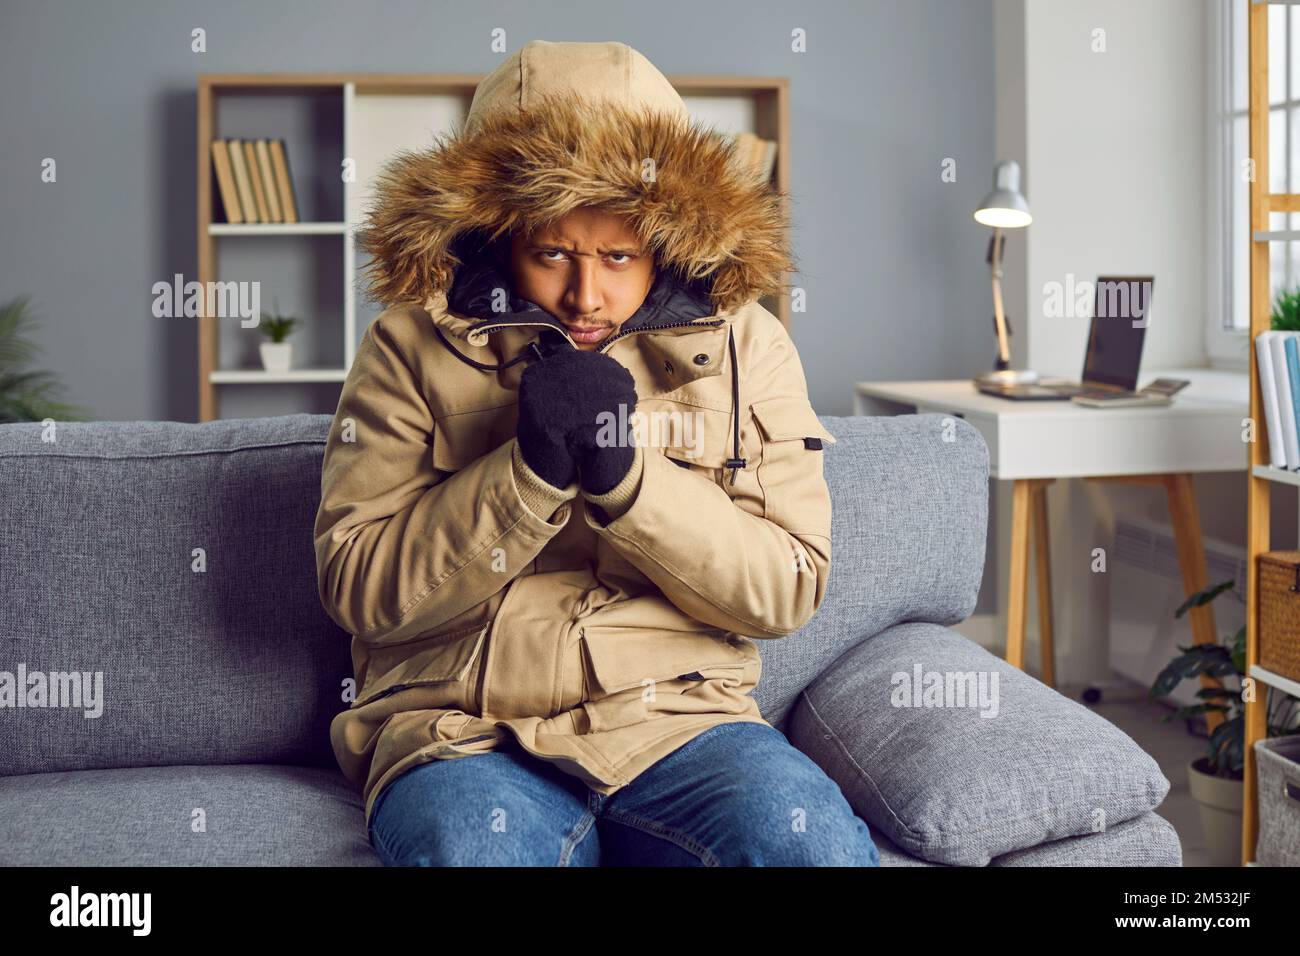 Young man freezing in cold winter and wearing coat inside house without central heating Stock Photo